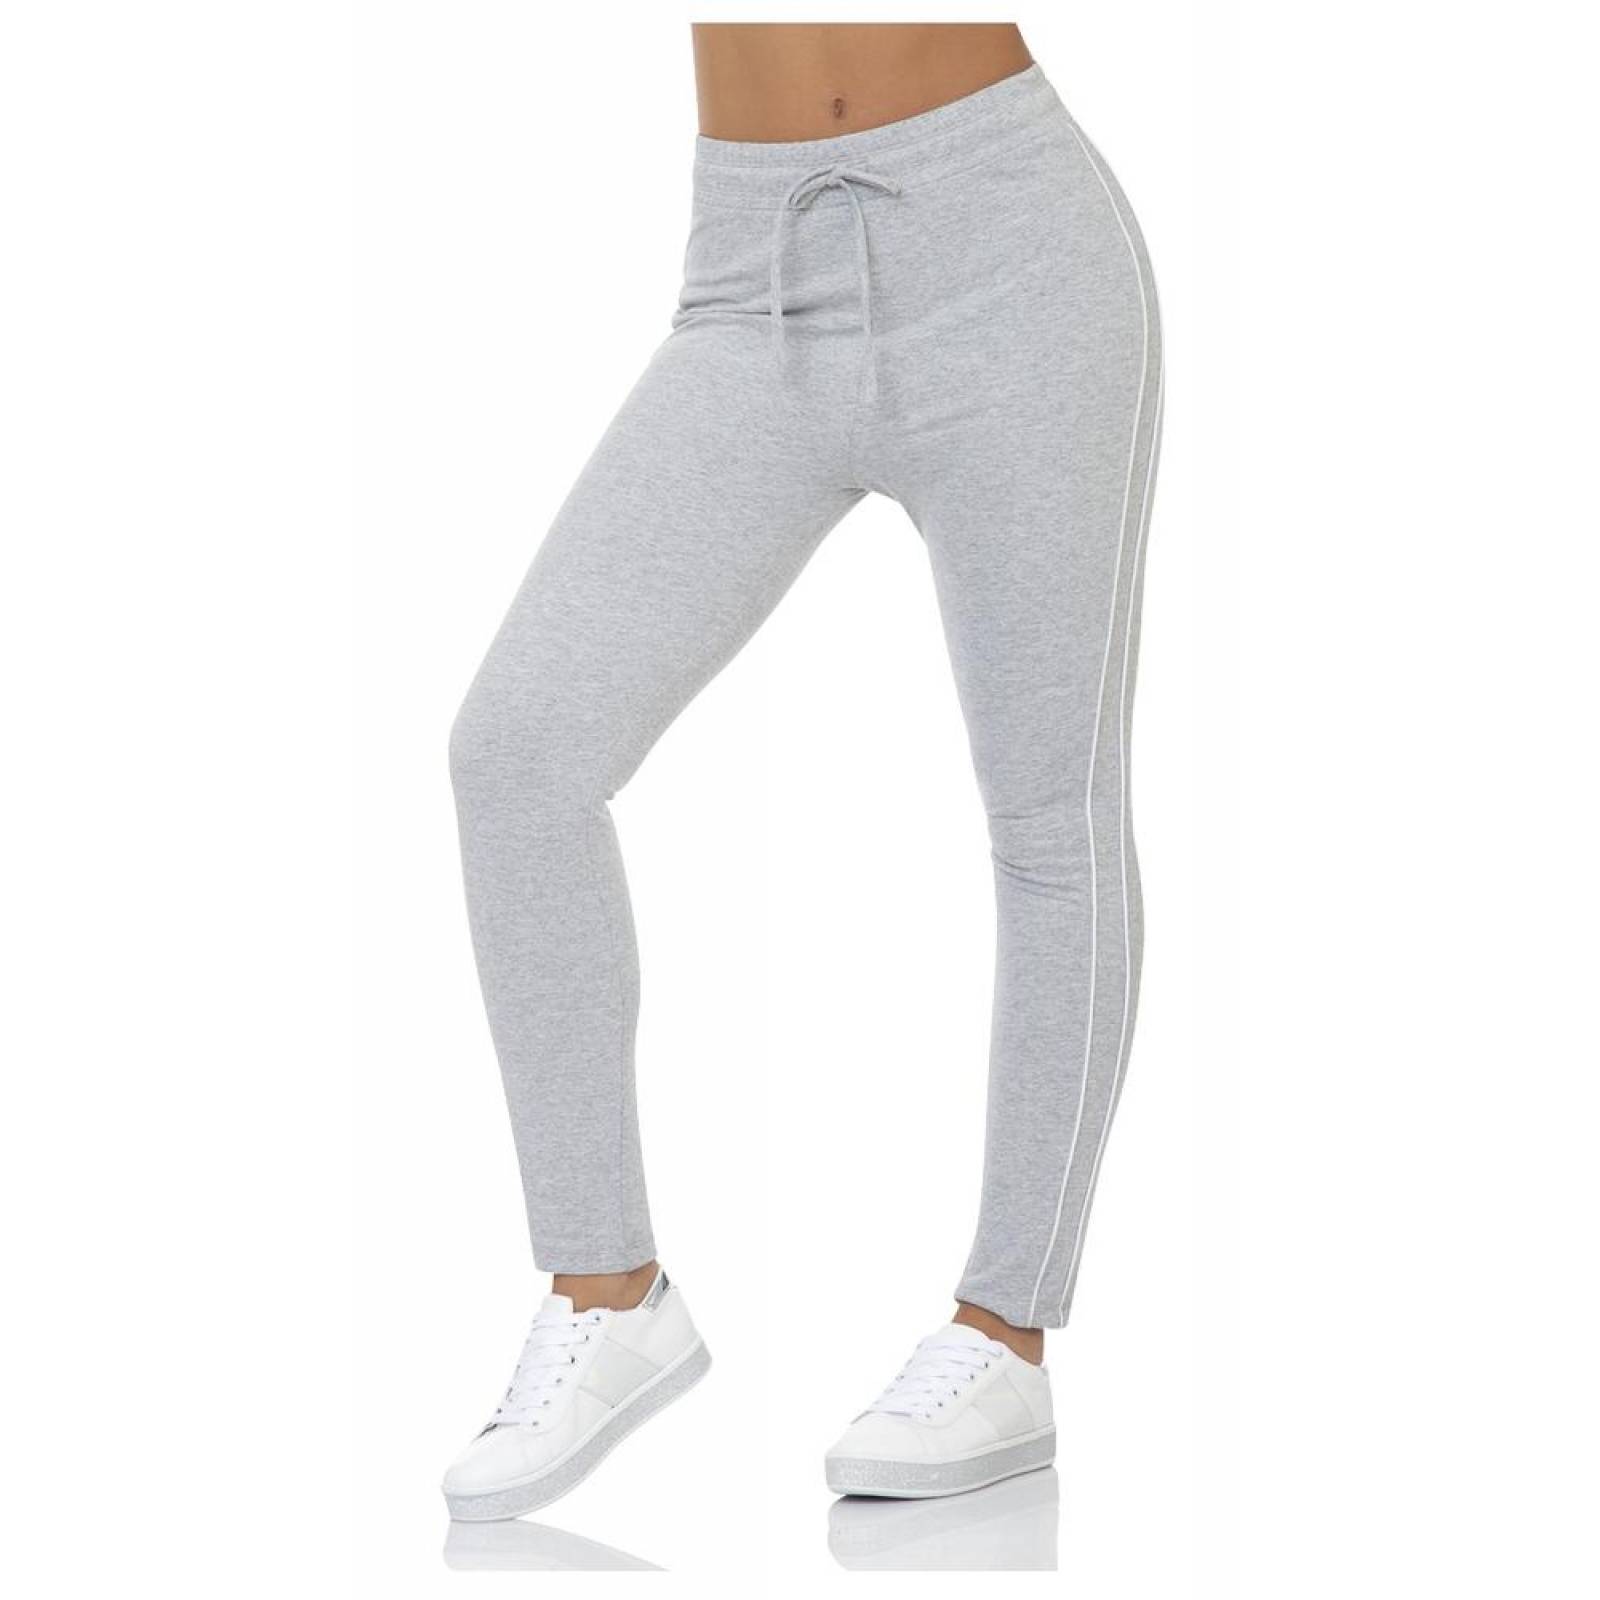 PANTS PERSONALITY MUJER GRIS SPANDEX 2106 